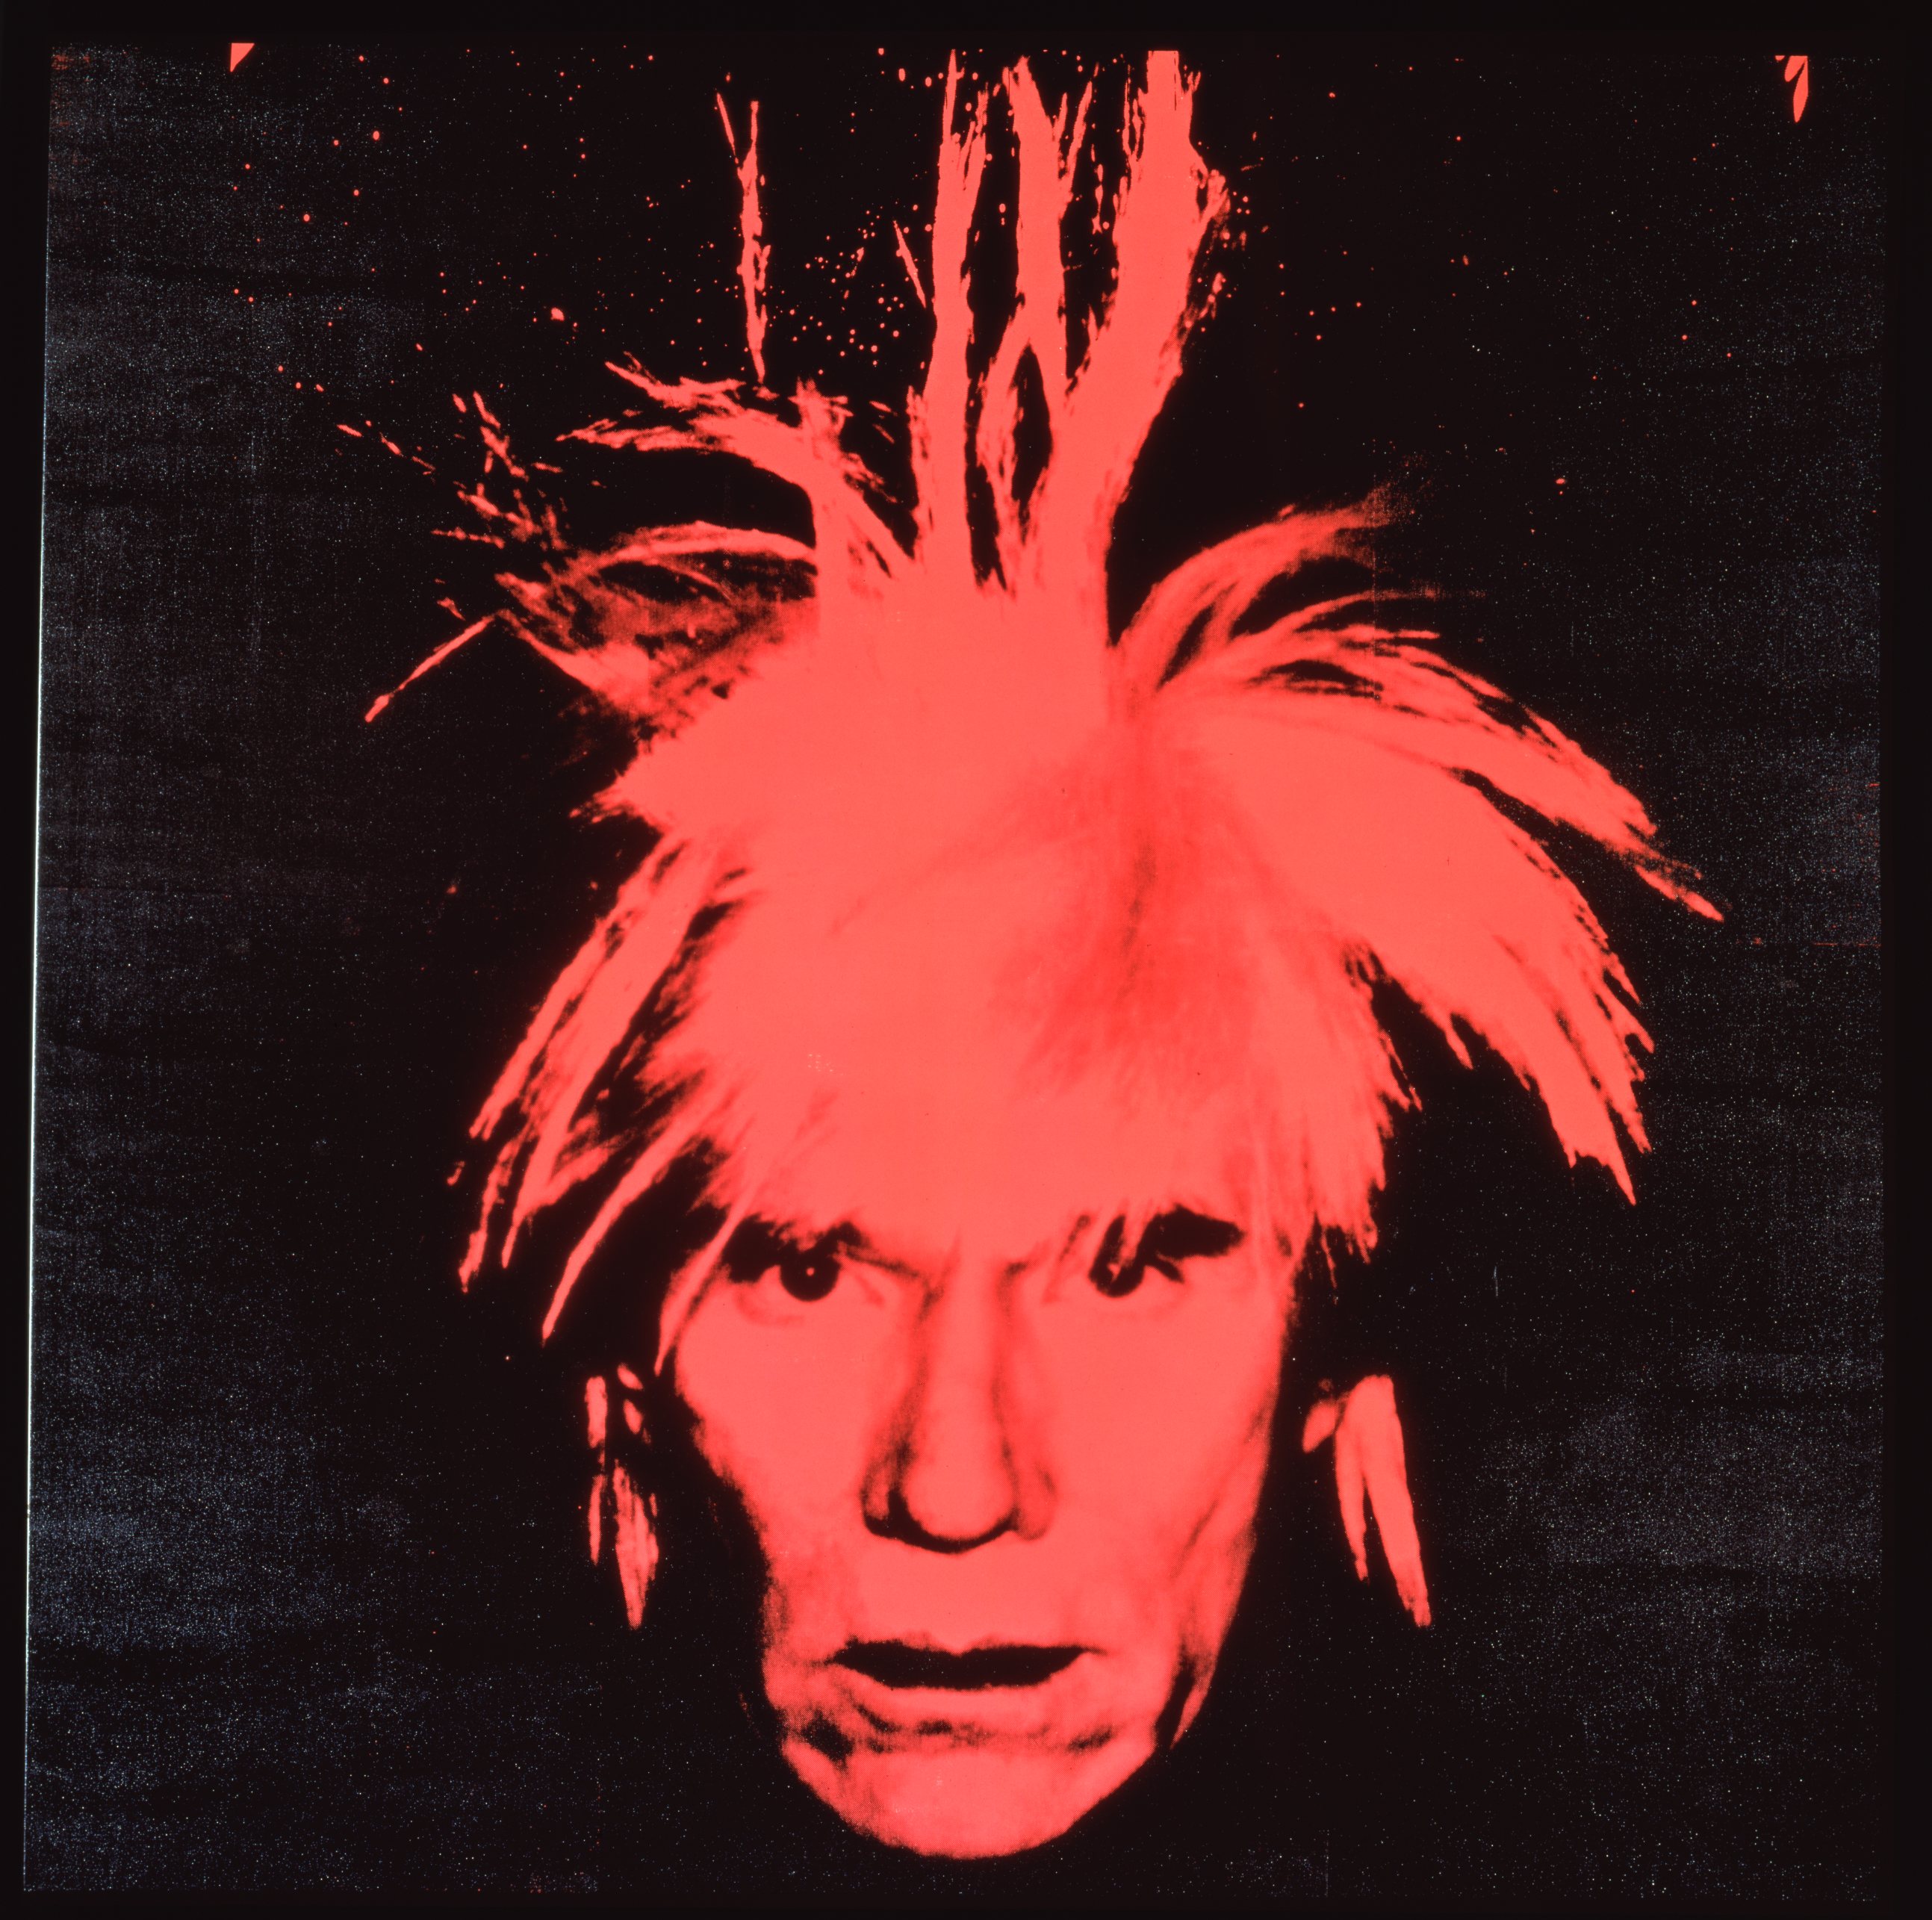 Andy Warhol. Courtesy of Press Office